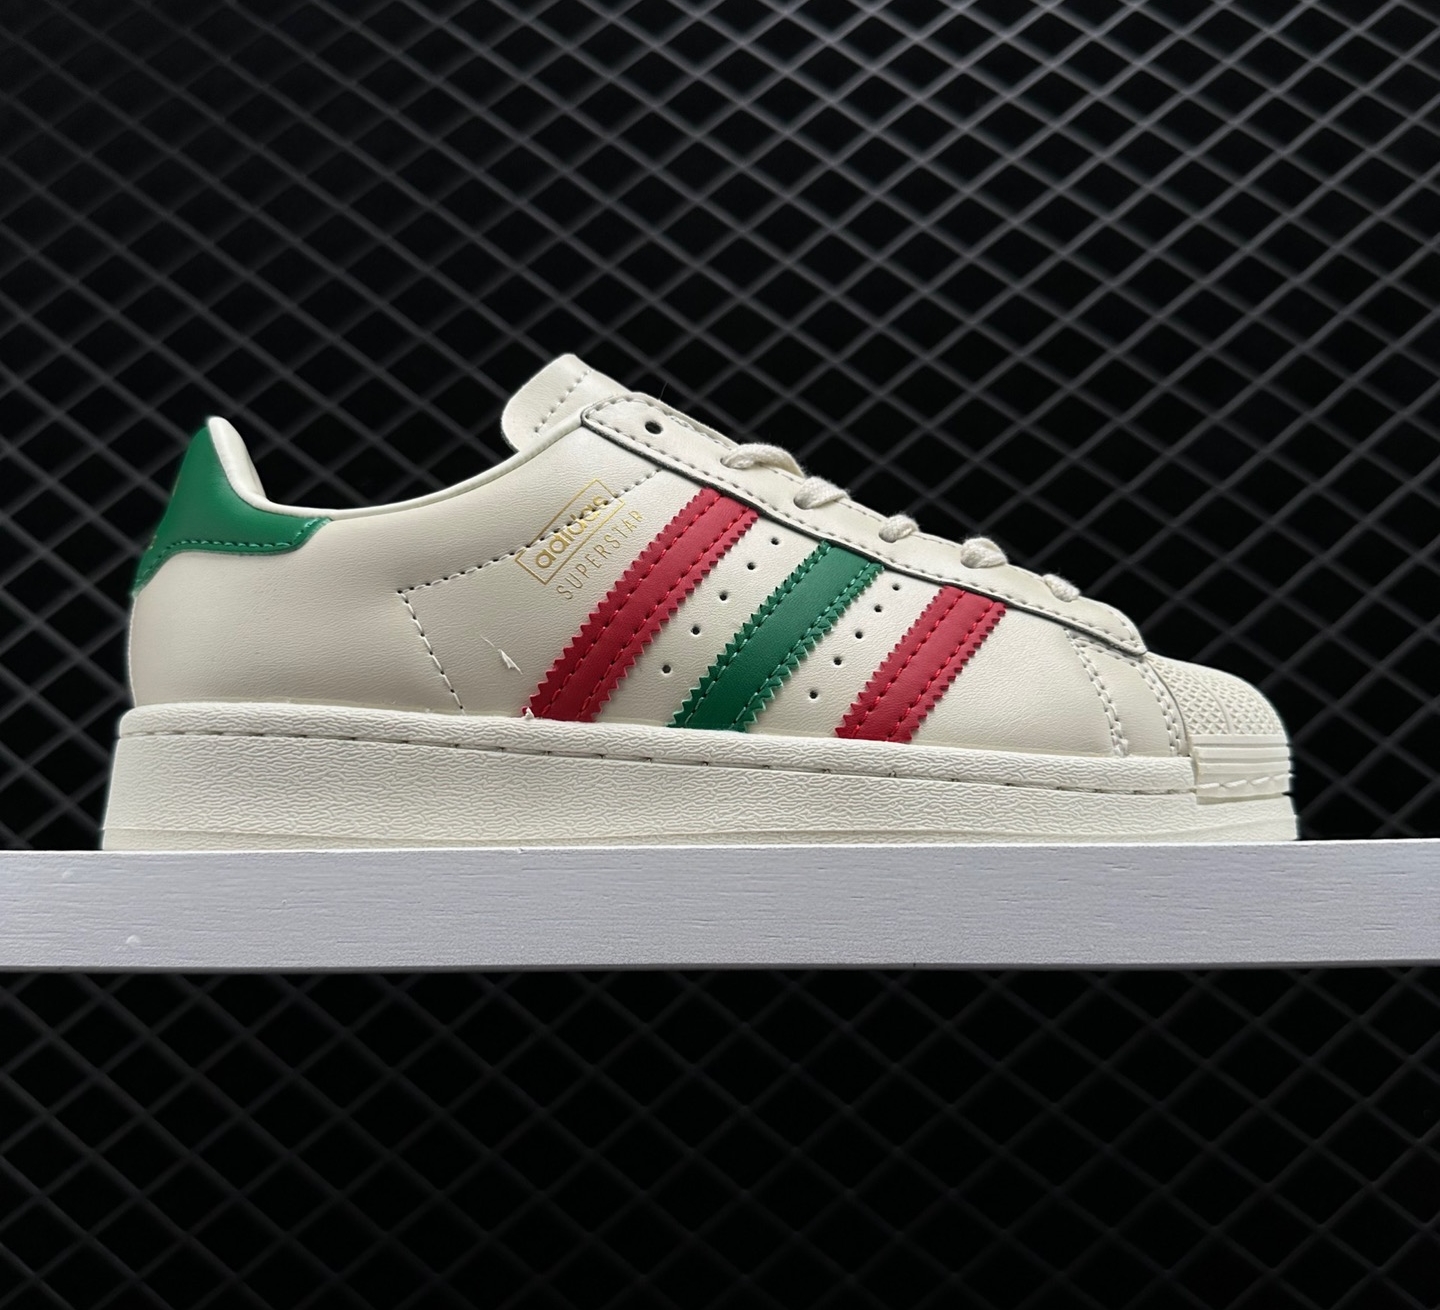 Adidas Originals Superstar White Green Red FZ5435 - Stylish and Classic Sneakers